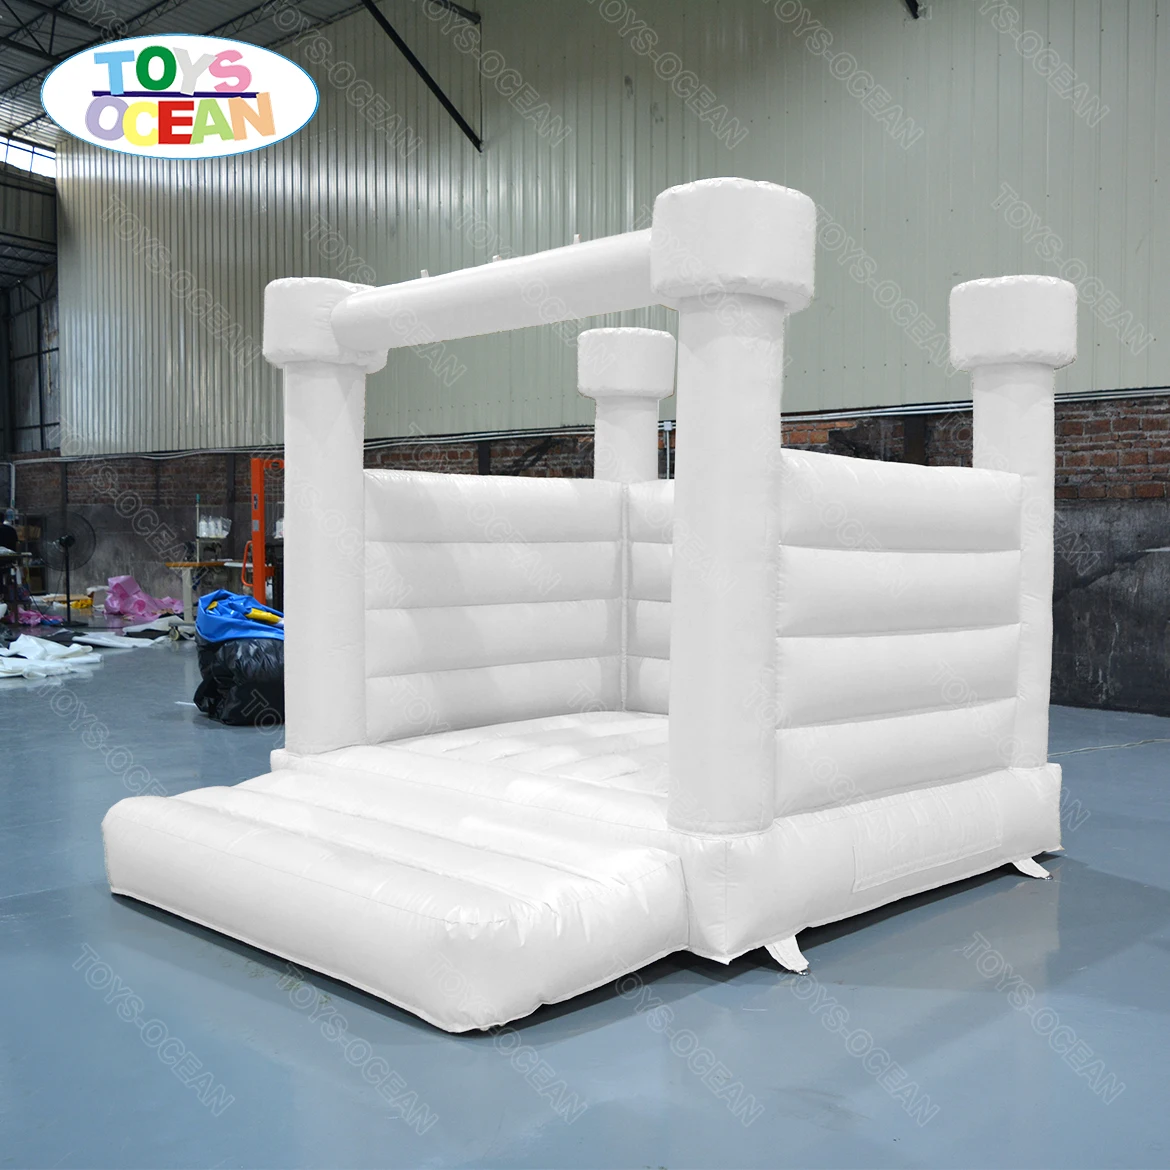 

10X10ft white bounce house kids bouncy castle jumper inflatable